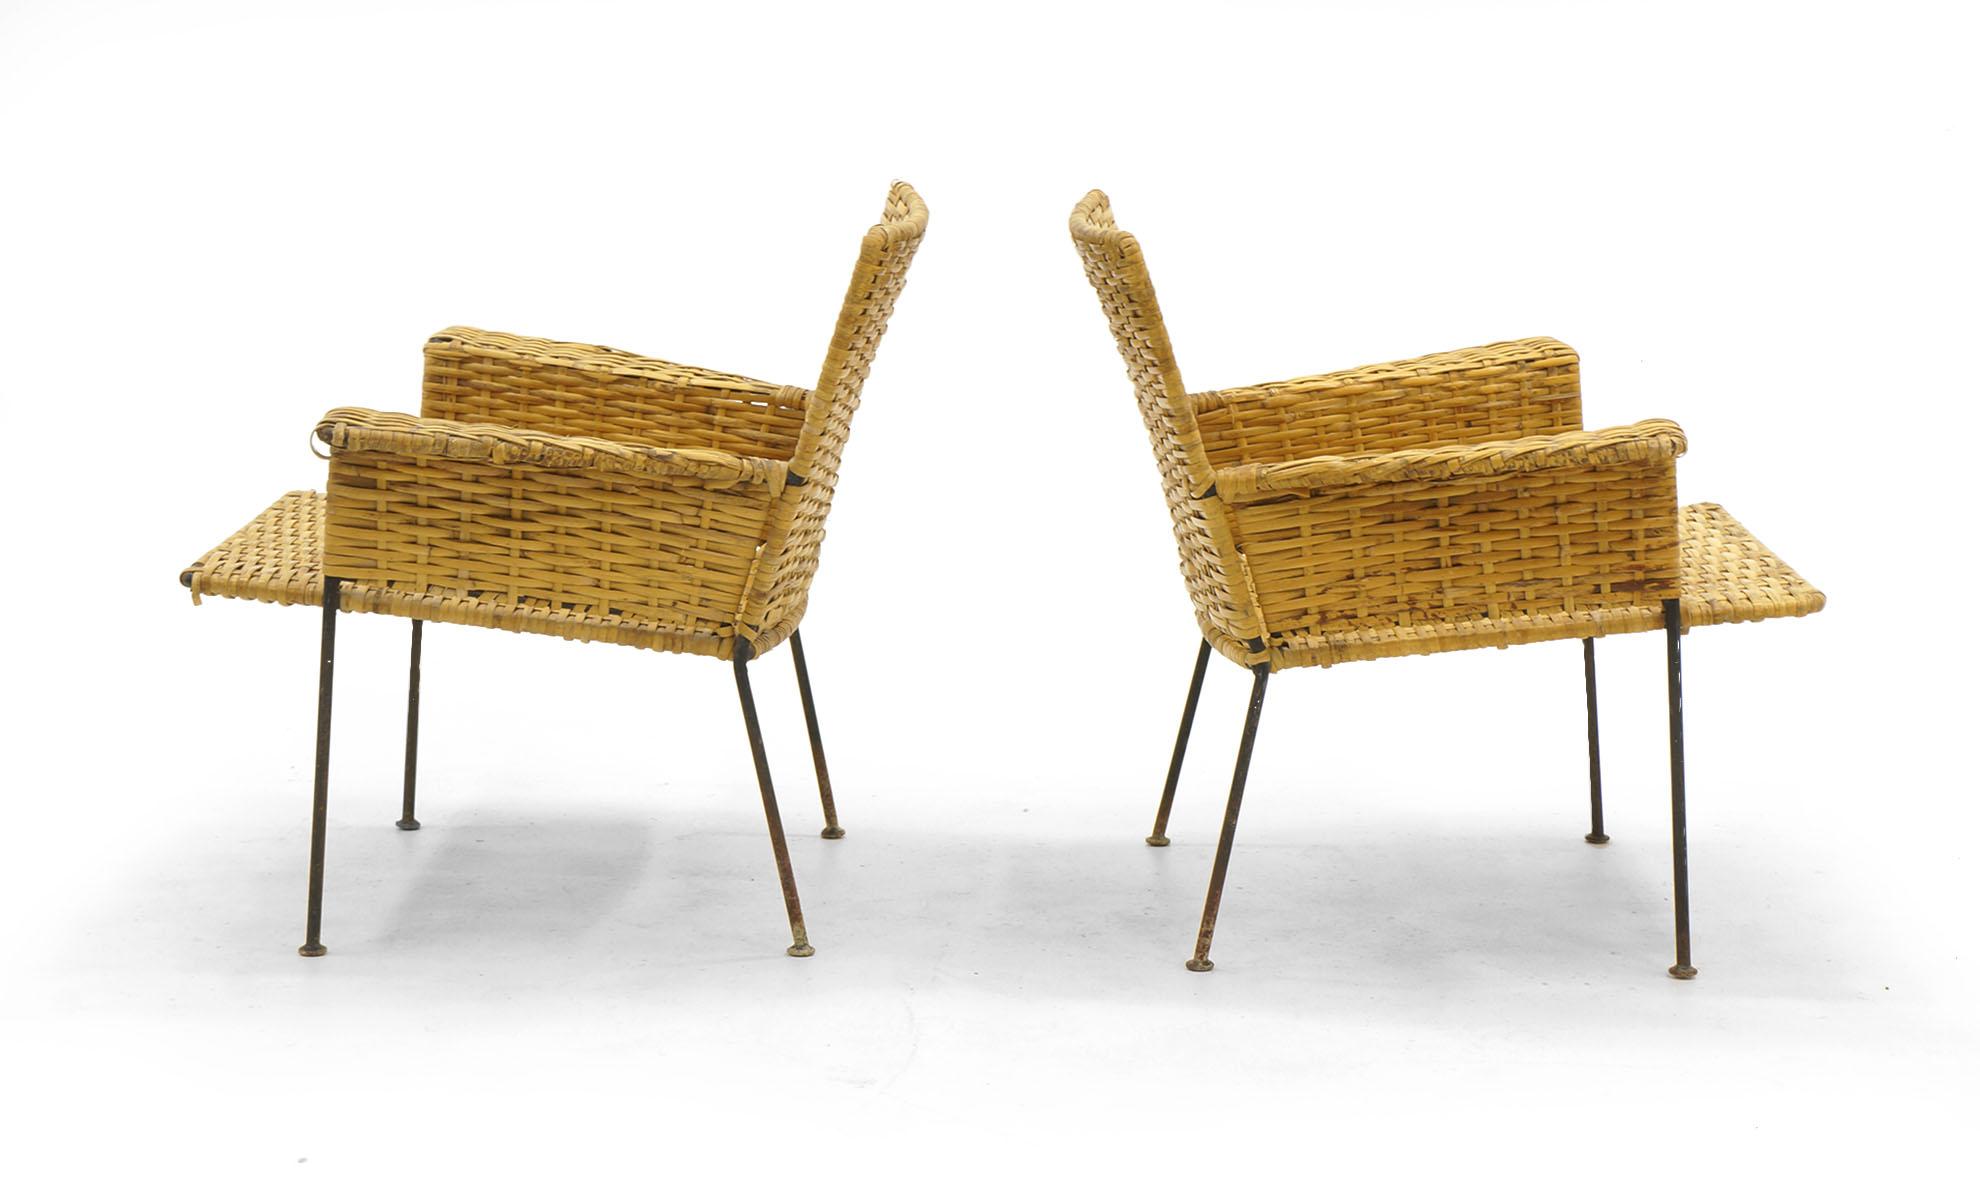 Pair of Van Keppel and Green wicker and wrought iron lounge chairs. Attractive wear to both the wicker and legs. Great for use outdoors or on a porch. We have meticulously cleaned the wicker.